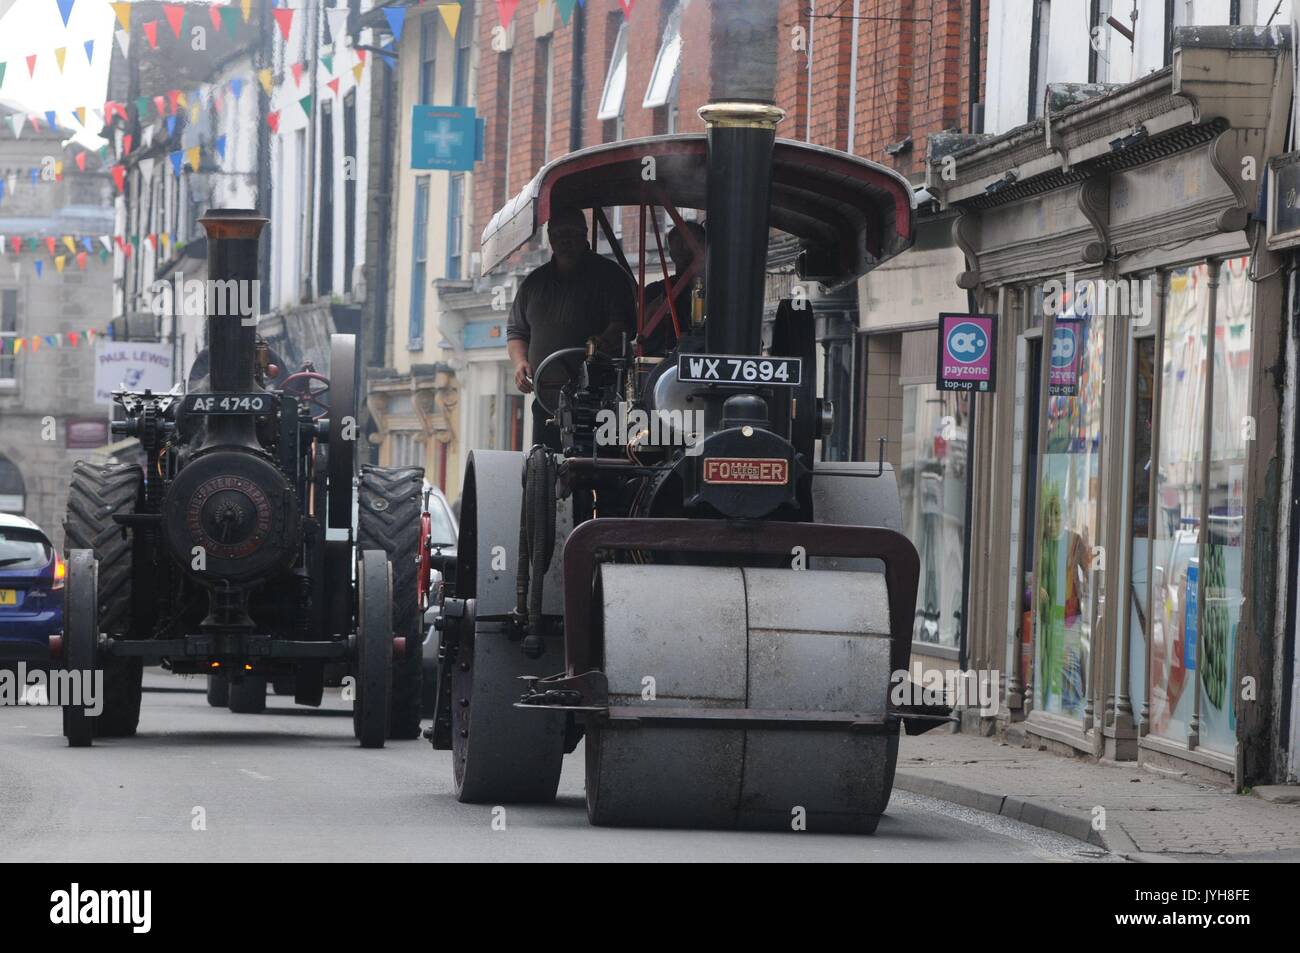 Kington, , UK. 20th Aug, 2017. The Herefordshire market town of Kington came to a standstill while a parade of vintage vehicles made their way to the Kington Vintage Club's 25th Annual Show. A1931 Fowler DNA Steam Roller followed by a Wallis and Steevens Traction Engine make their way up Kington High Street. Credit: Andrew Compton/Alamy Live News Stock Photo